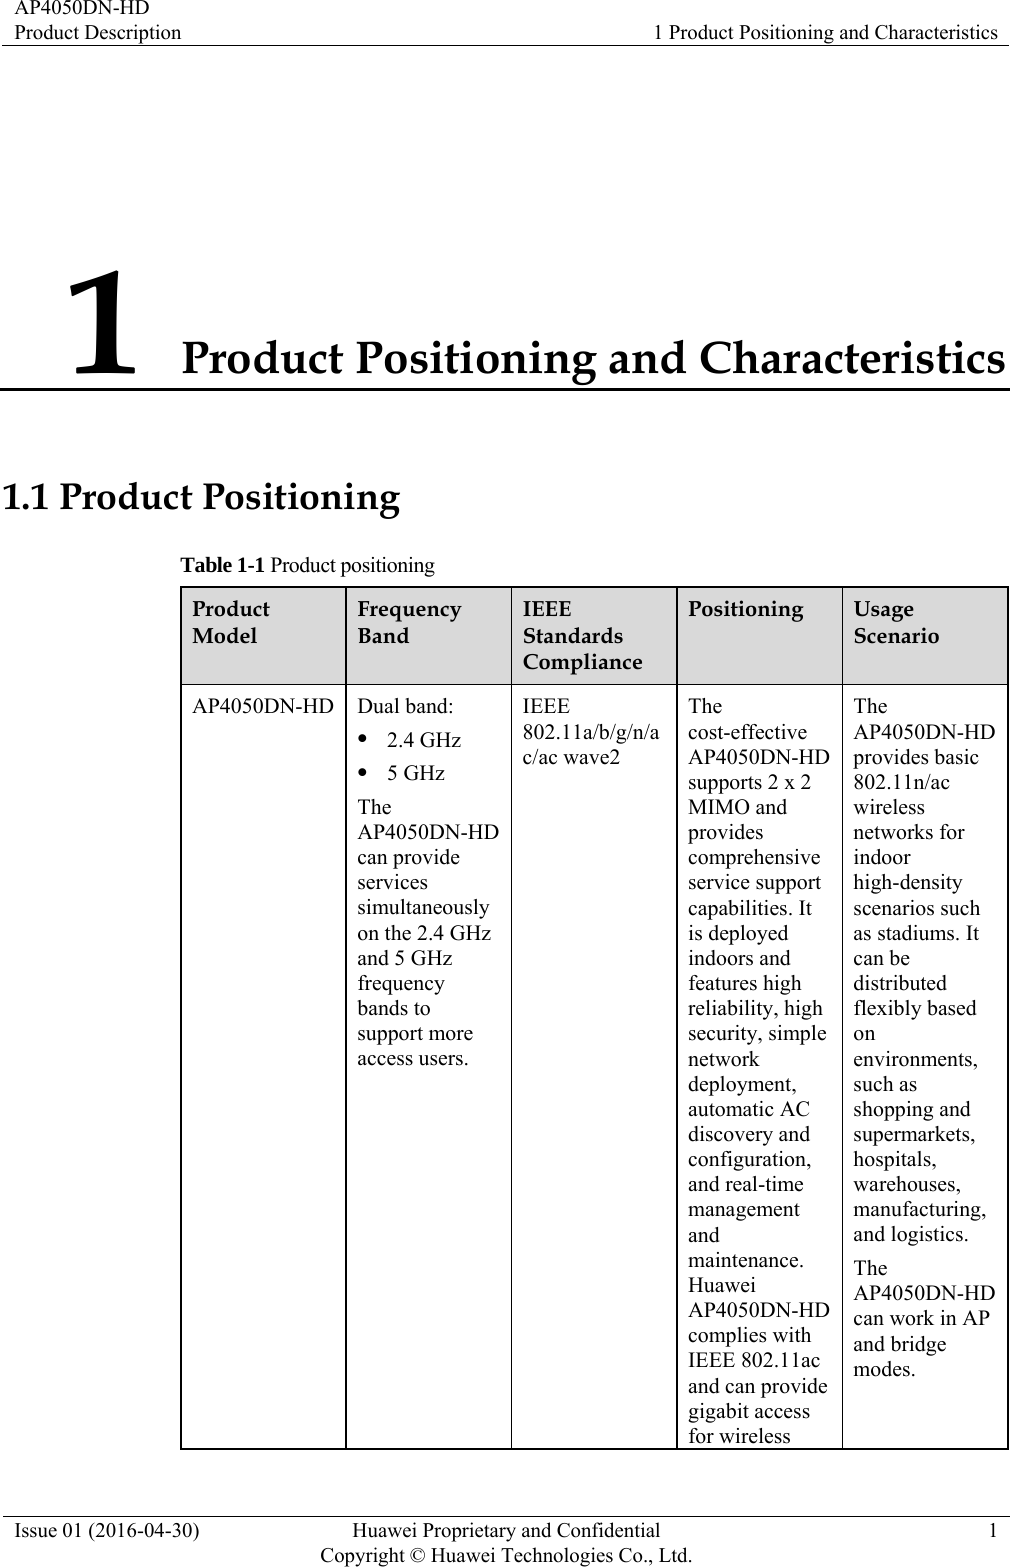 AP4050DN-HD Product Description  1 Product Positioning and Characteristics Issue 01 (2016-04-30)  Huawei Proprietary and Confidential         Copyright © Huawei Technologies Co., Ltd.1 1 Product Positioning and Characteristics 1.1 Product Positioning Table 1-1 Product positioning Product Model Frequency Band IEEE Standards Compliance Positioning  Usage Scenario AP4050DN-HD Dual band:  2.4 GHz  5 GHz The AP4050DN-HD can provide services simultaneously on the 2.4 GHz and 5 GHz frequency bands to support more access users. IEEE 802.11a/b/g/n/ac/ac wave2 The cost-effective AP4050DN-HD supports 2 x 2 MIMO and provides comprehensive service support capabilities. It is deployed indoors and features high reliability, high security, simple network deployment, automatic AC discovery and configuration, and real-time management and maintenance. Huawei AP4050DN-HD complies with IEEE 802.11ac and can provide gigabit access for wireless The AP4050DN-HD provides basic 802.11n/ac wireless networks for indoor high-density scenarios such as stadiums. It can be distributed flexibly based on environments, such as shopping and supermarkets, hospitals, warehouses, manufacturing, and logistics.   The AP4050DN-HD can work in AP and bridge modes. 